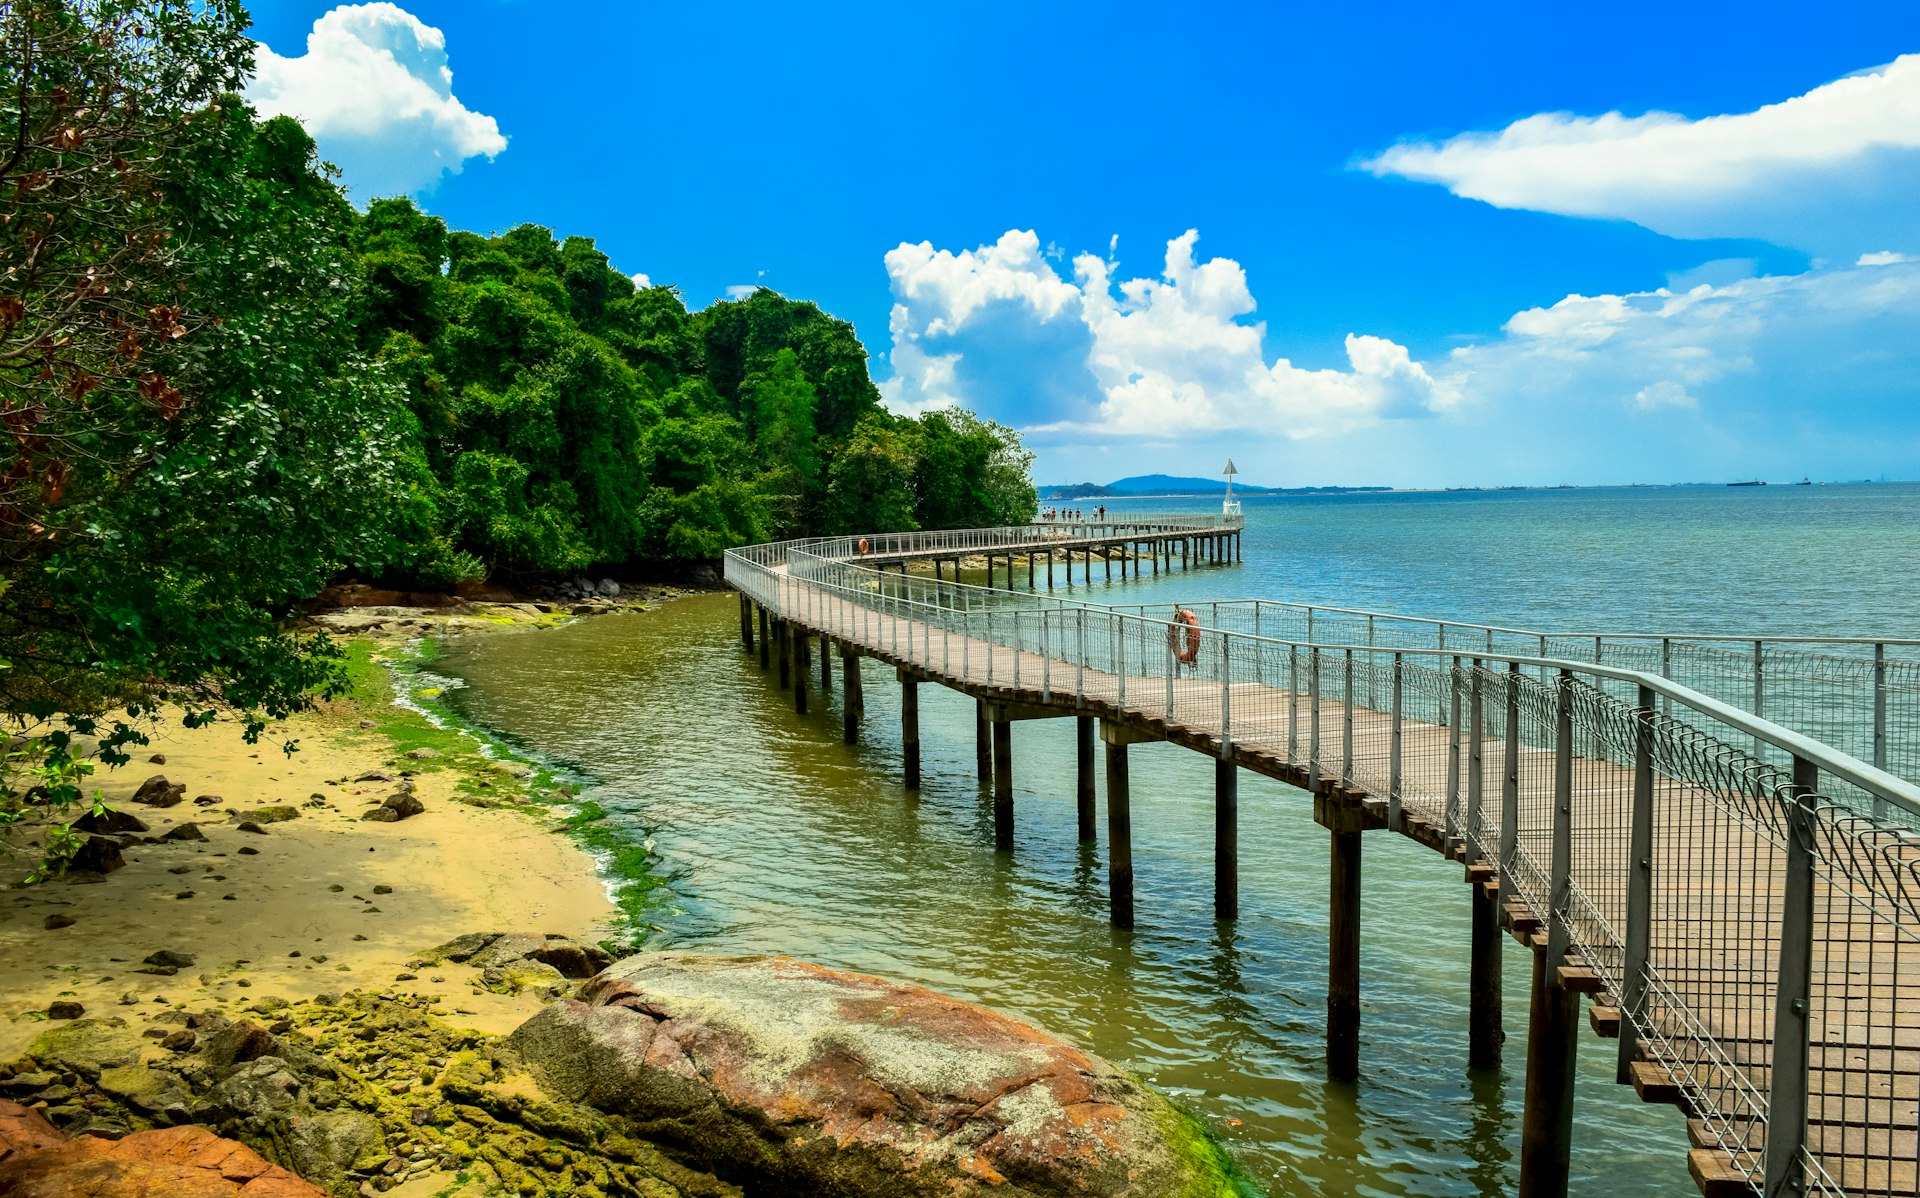 A boardwalk on a bridge along the Pulau Ubin island Singapore. A picturesque place with beautiful sunny beaches for cycling along or kayaking. 